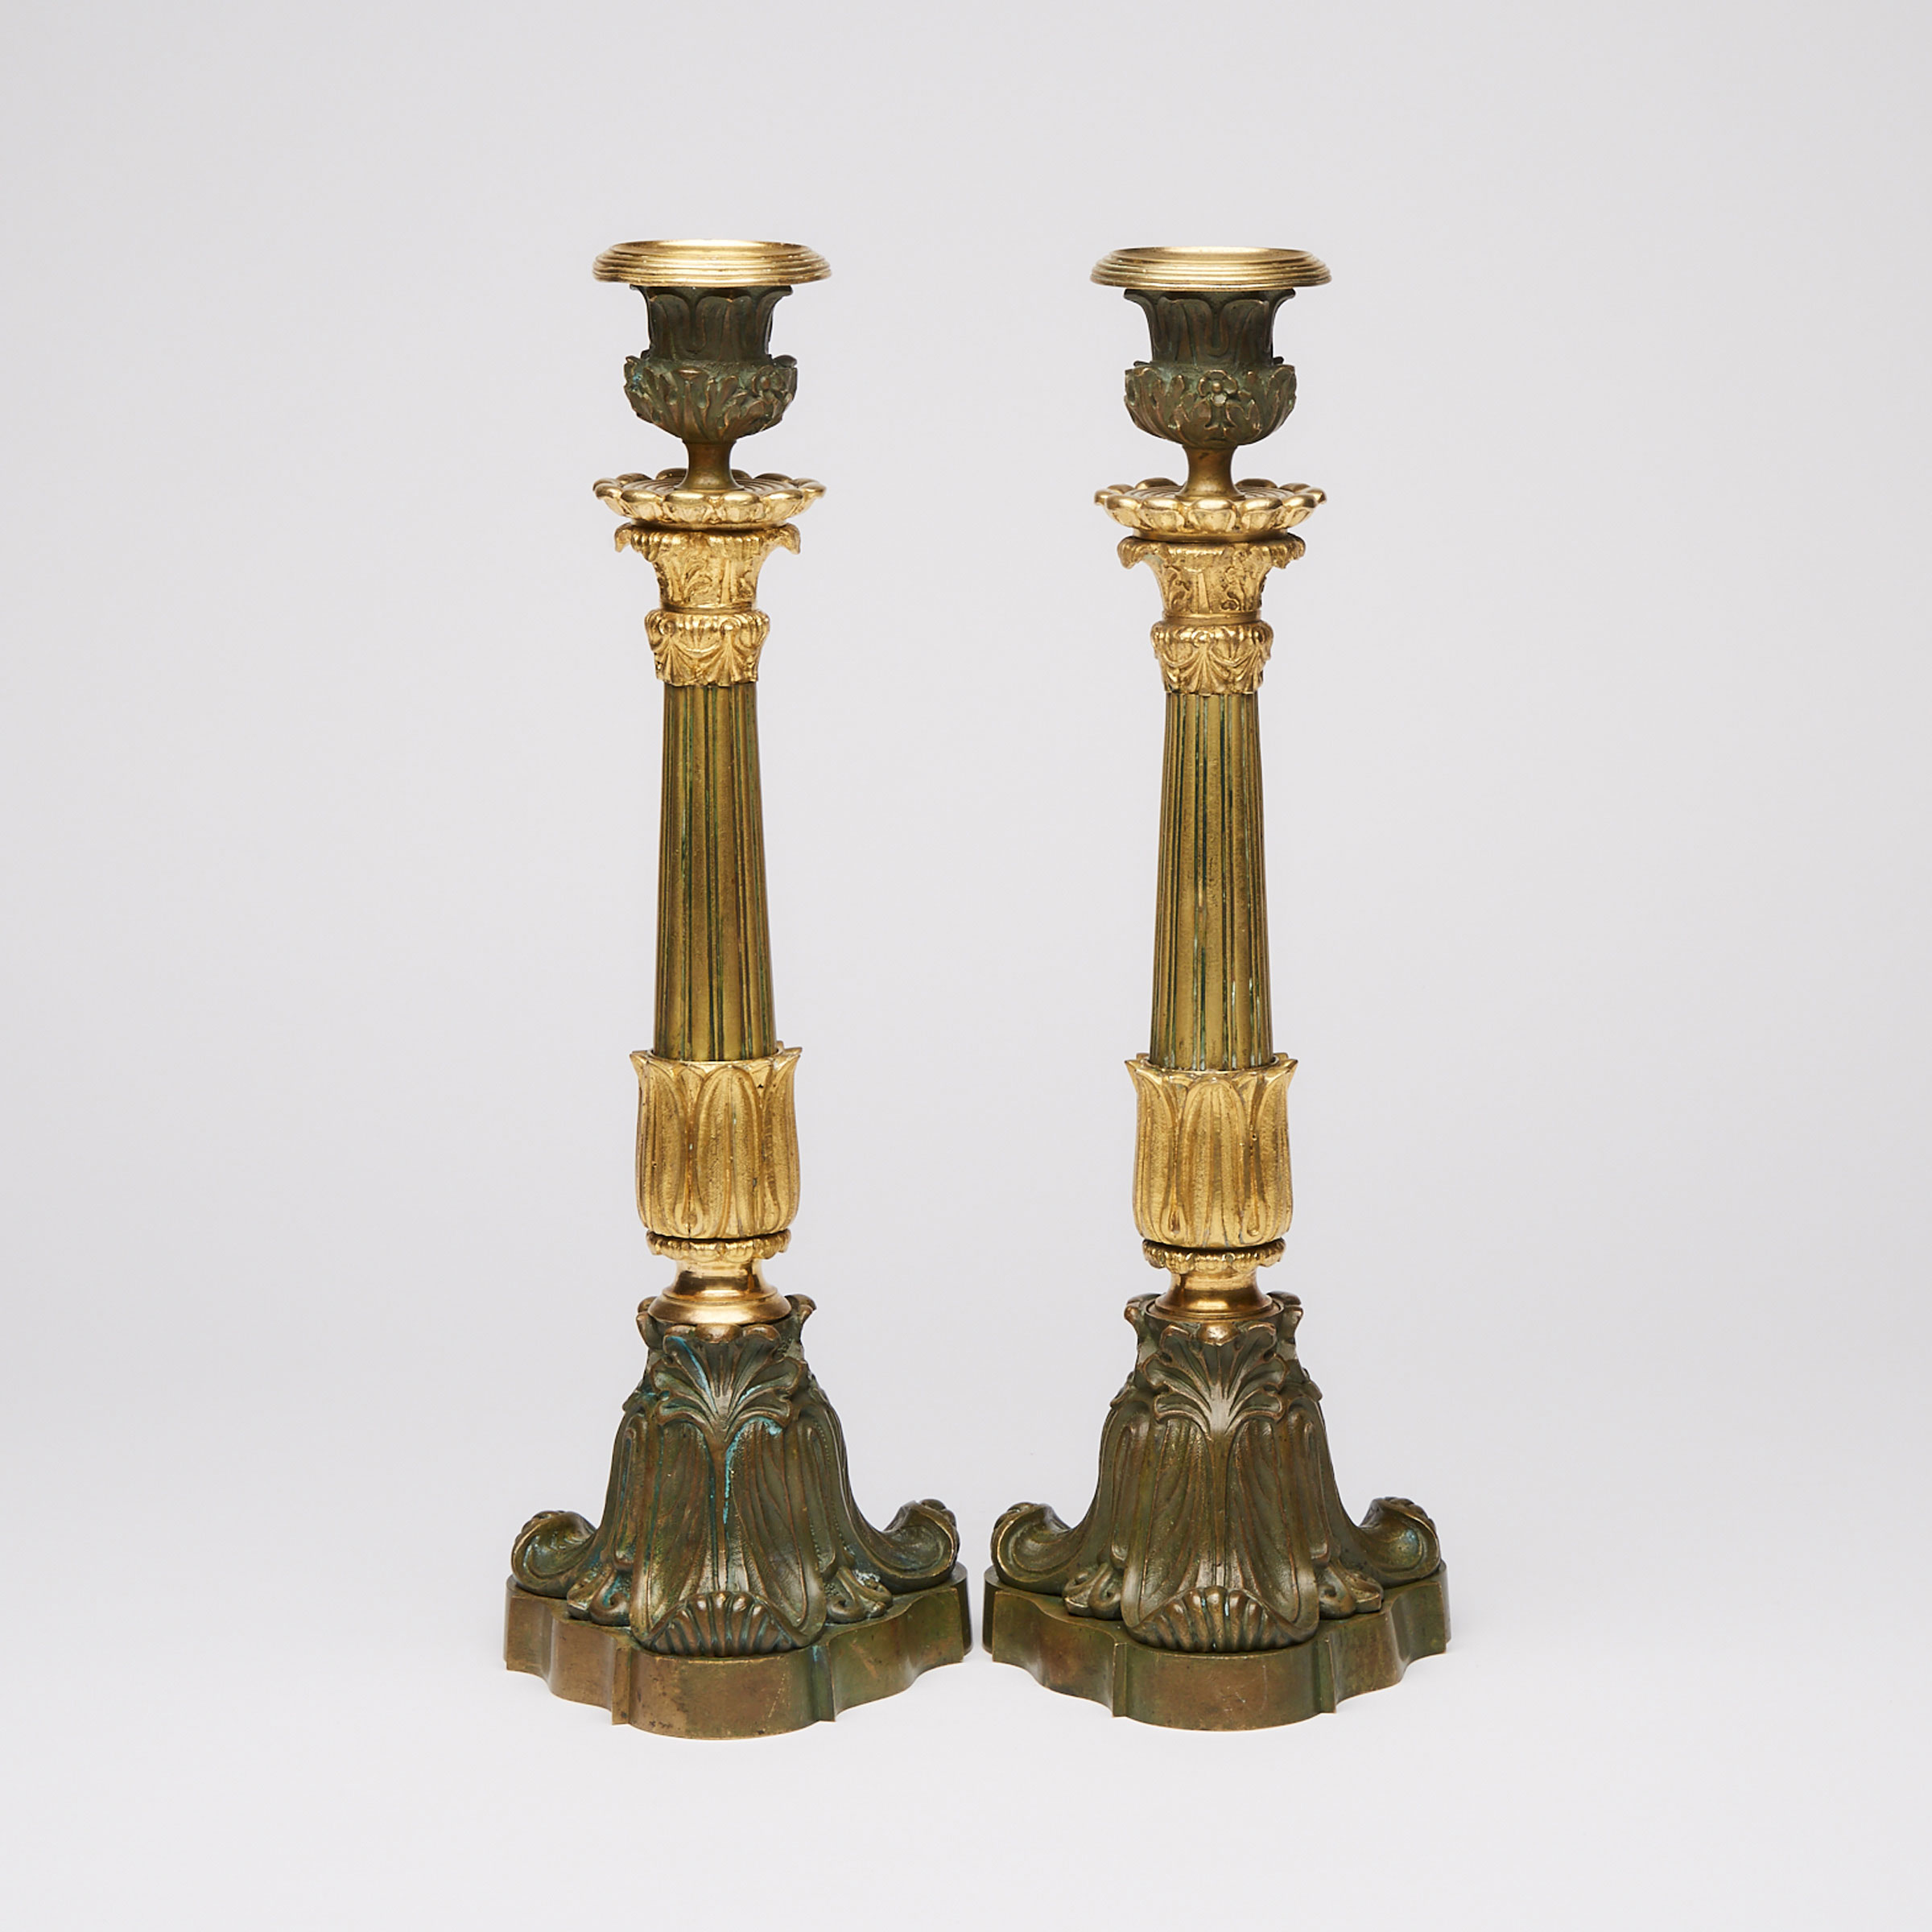 Pair of French Empire Gilt and Patinated Bronze Candlesticks, mid 19th century